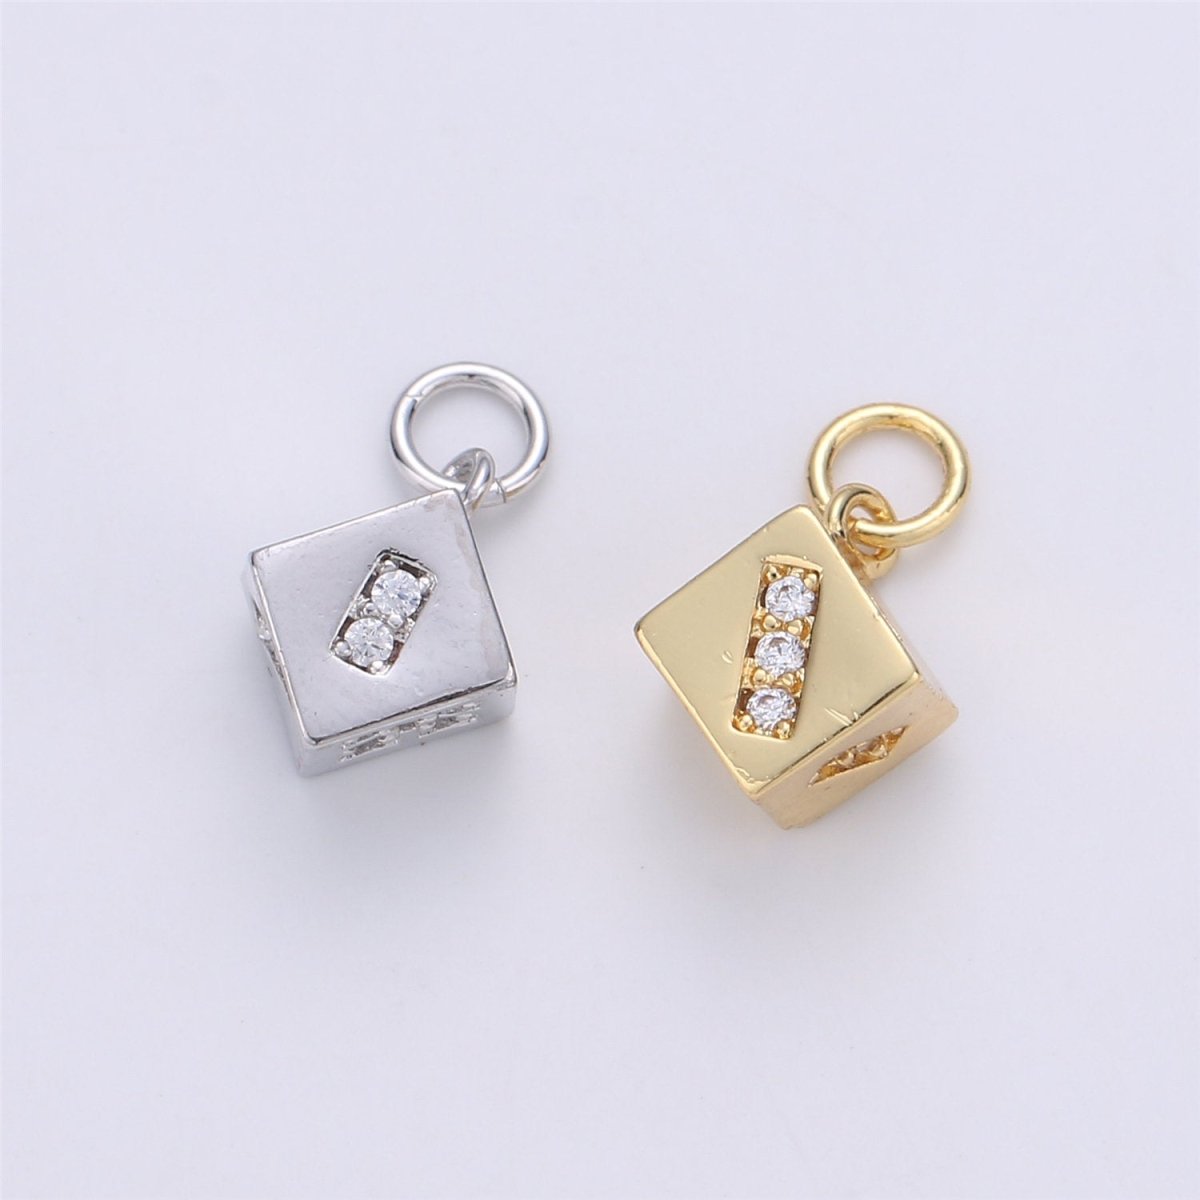 Tiny Dice Pendant Gold Silver Dice Charm Jewelry Craft Supply for necklace earring Bracelet Component C-918, C-426 - DLUXCA